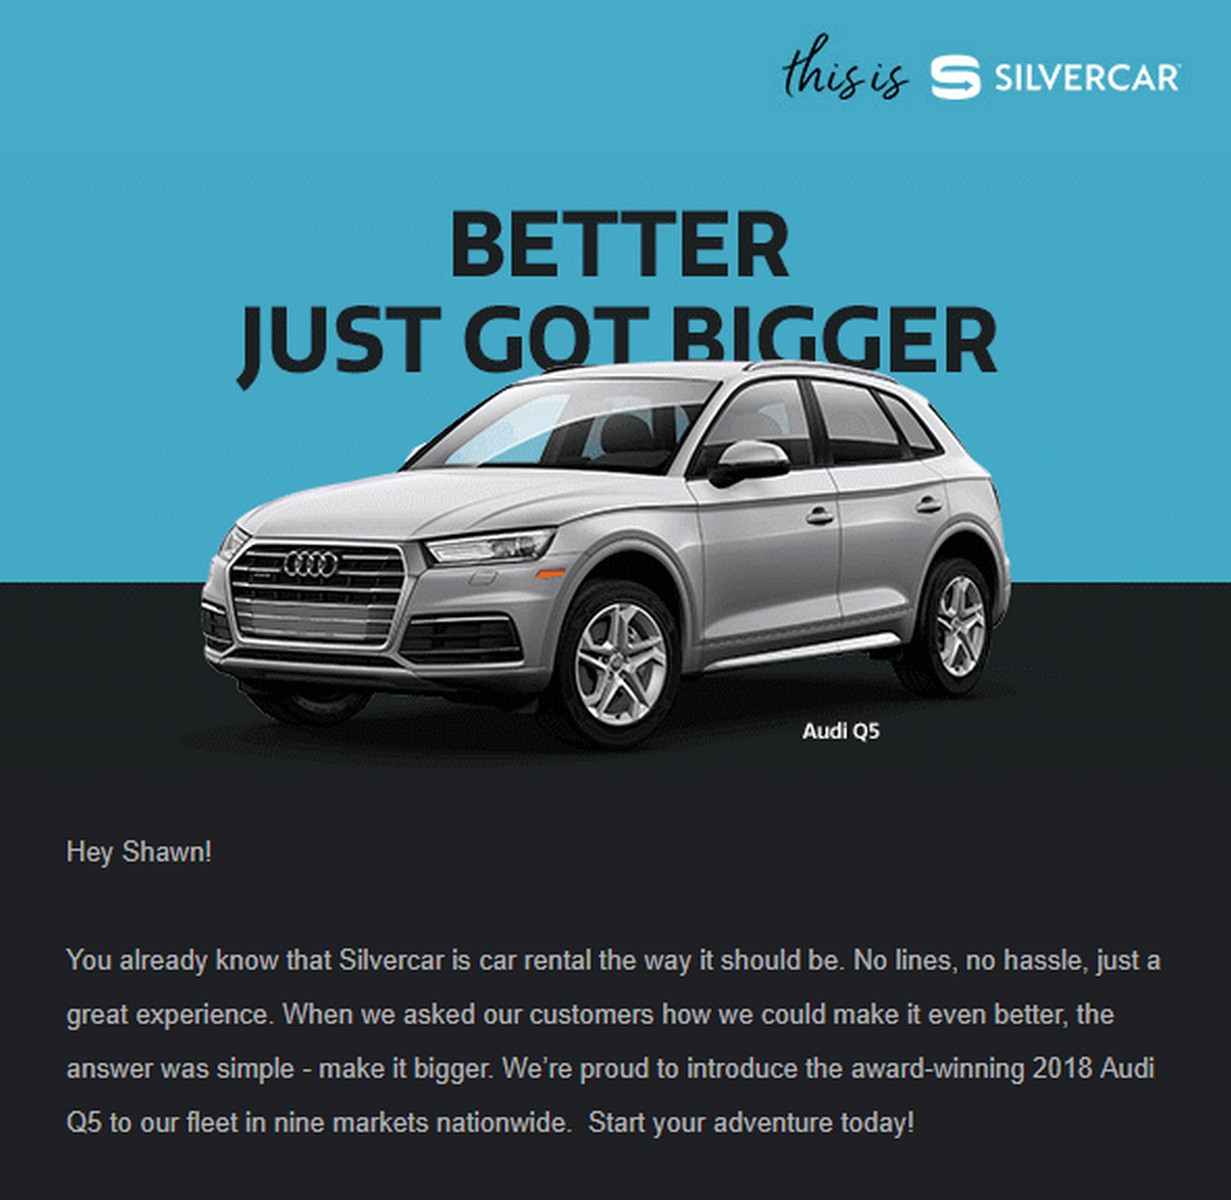 Silvercar Now Offers A SUV, The Audi Q5